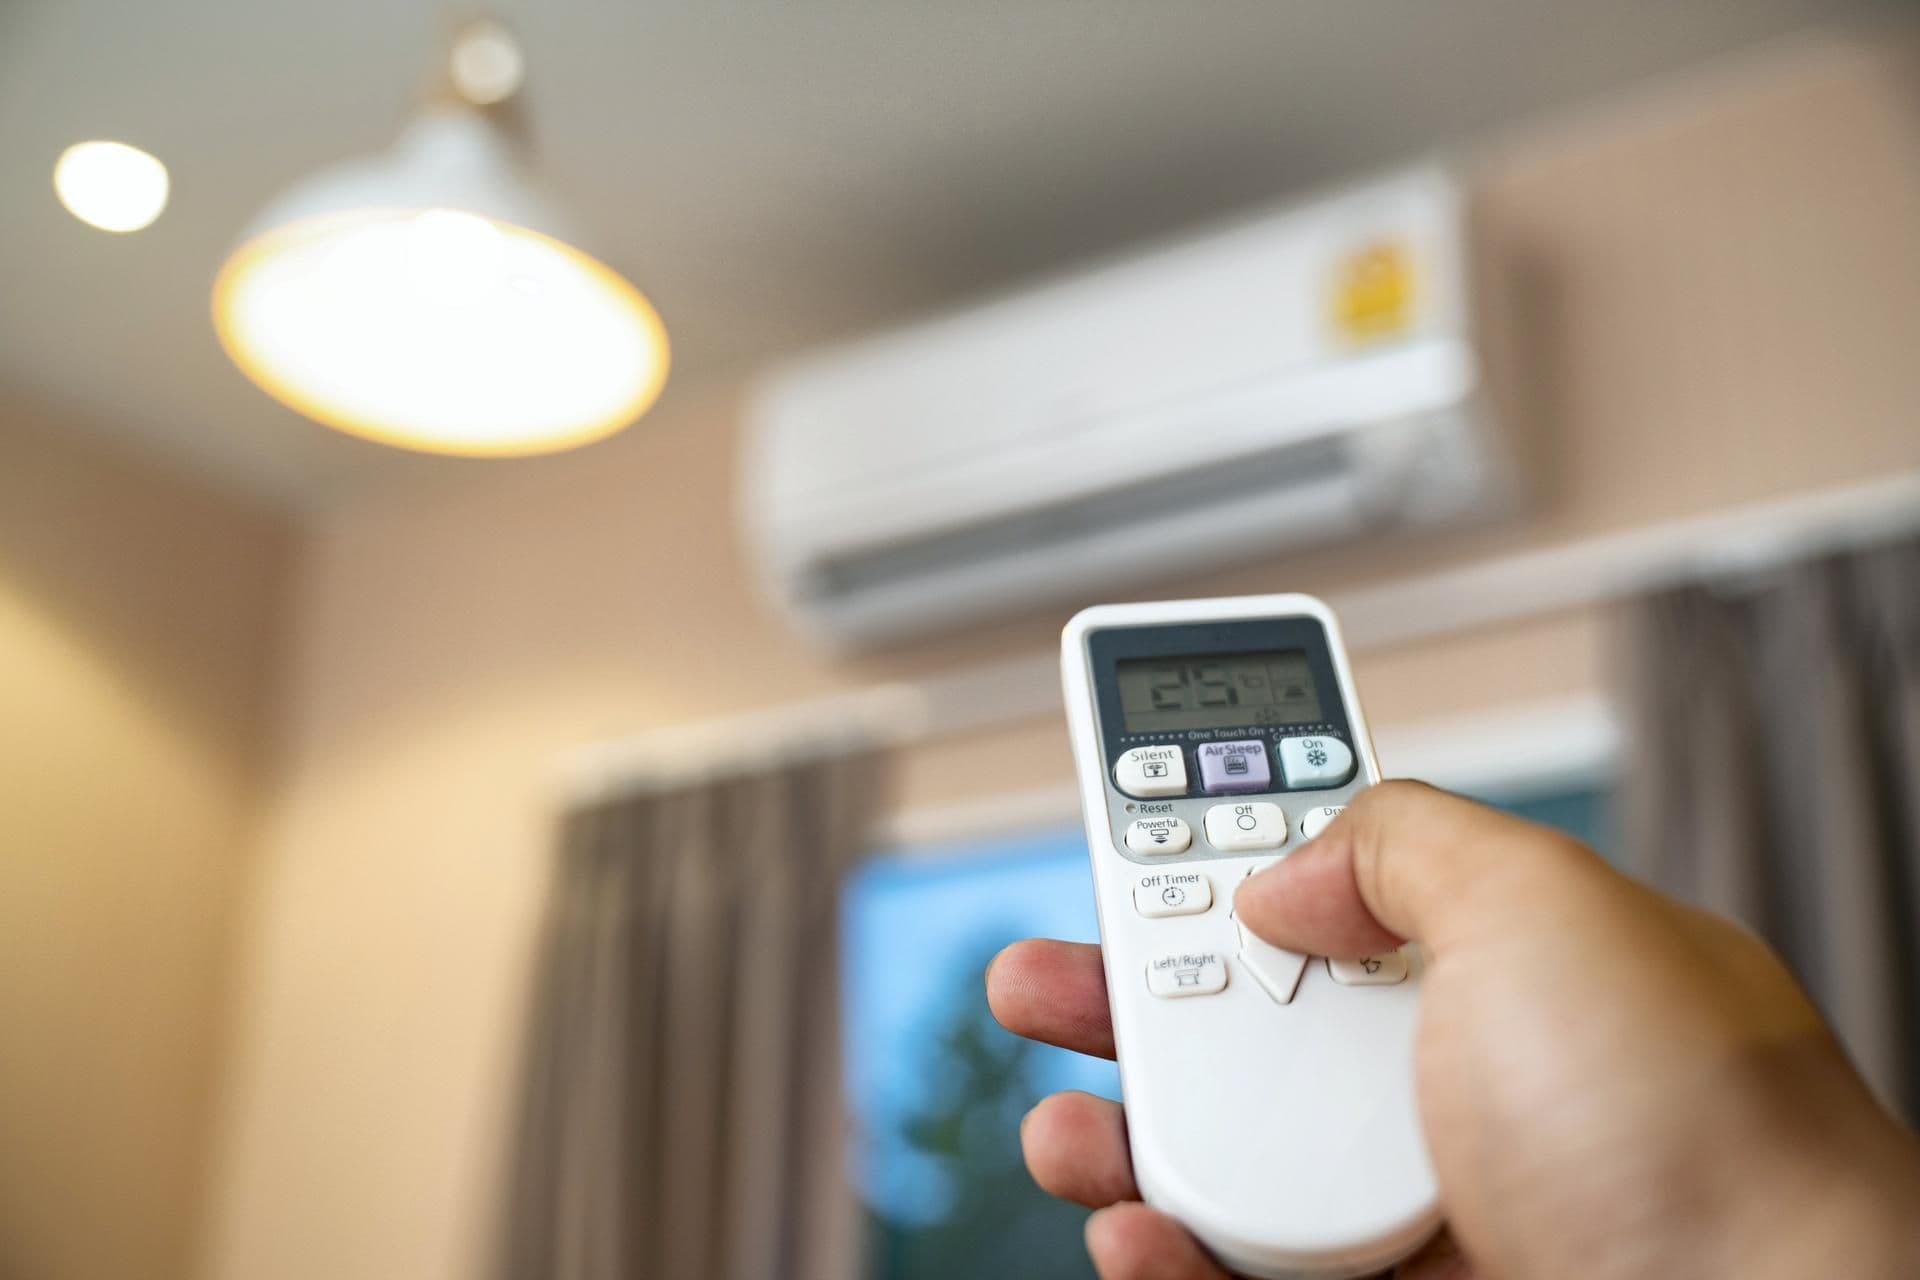 Emirati Company Joins Initiative to Develop World's Most Energy-Efficient Air Conditioners